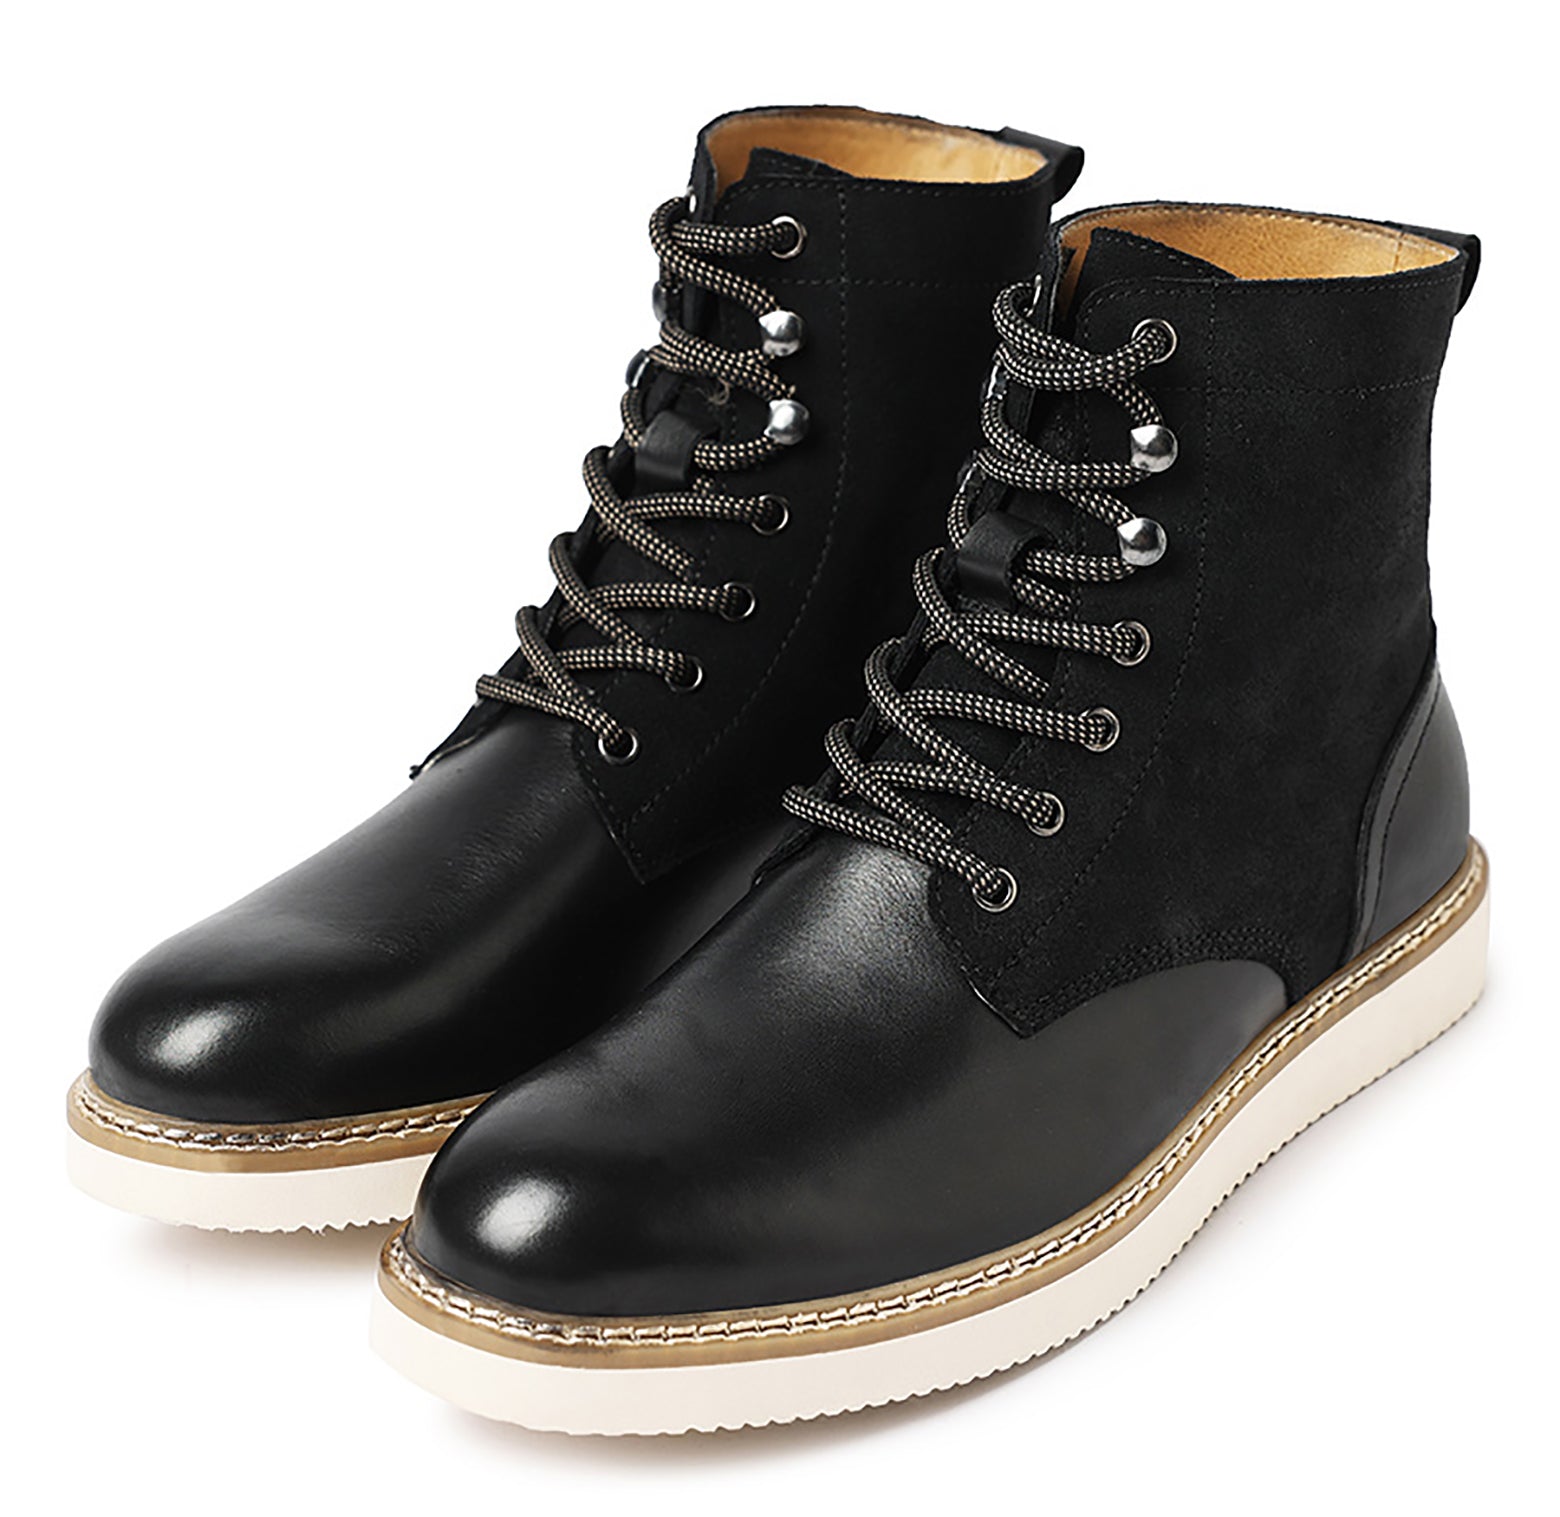 Men's Genuine Leather Lace Up Casual Dress Boots